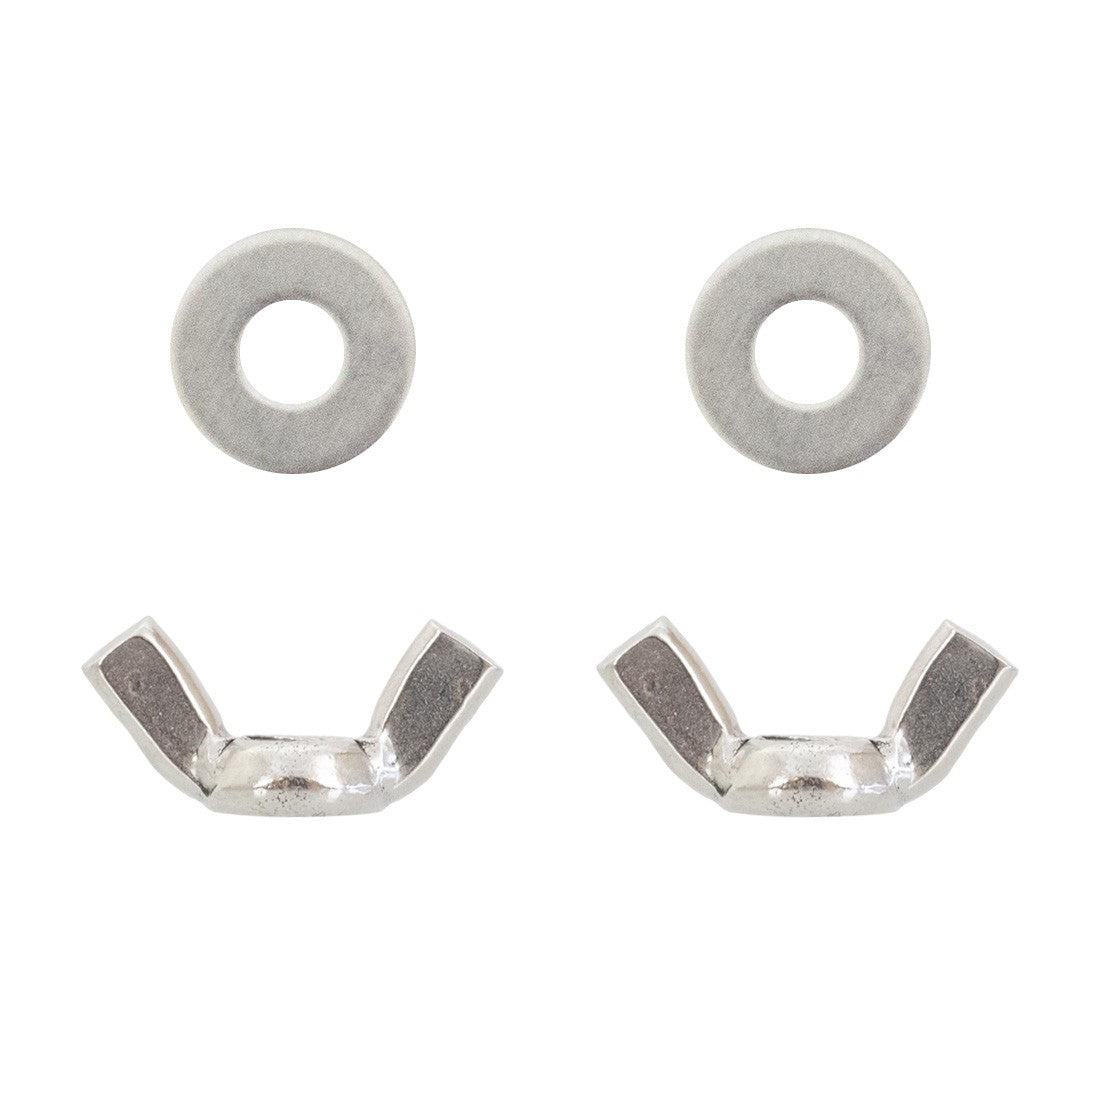 XERO Replacement Wing Nuts for Walnut Pad Holder Complete View